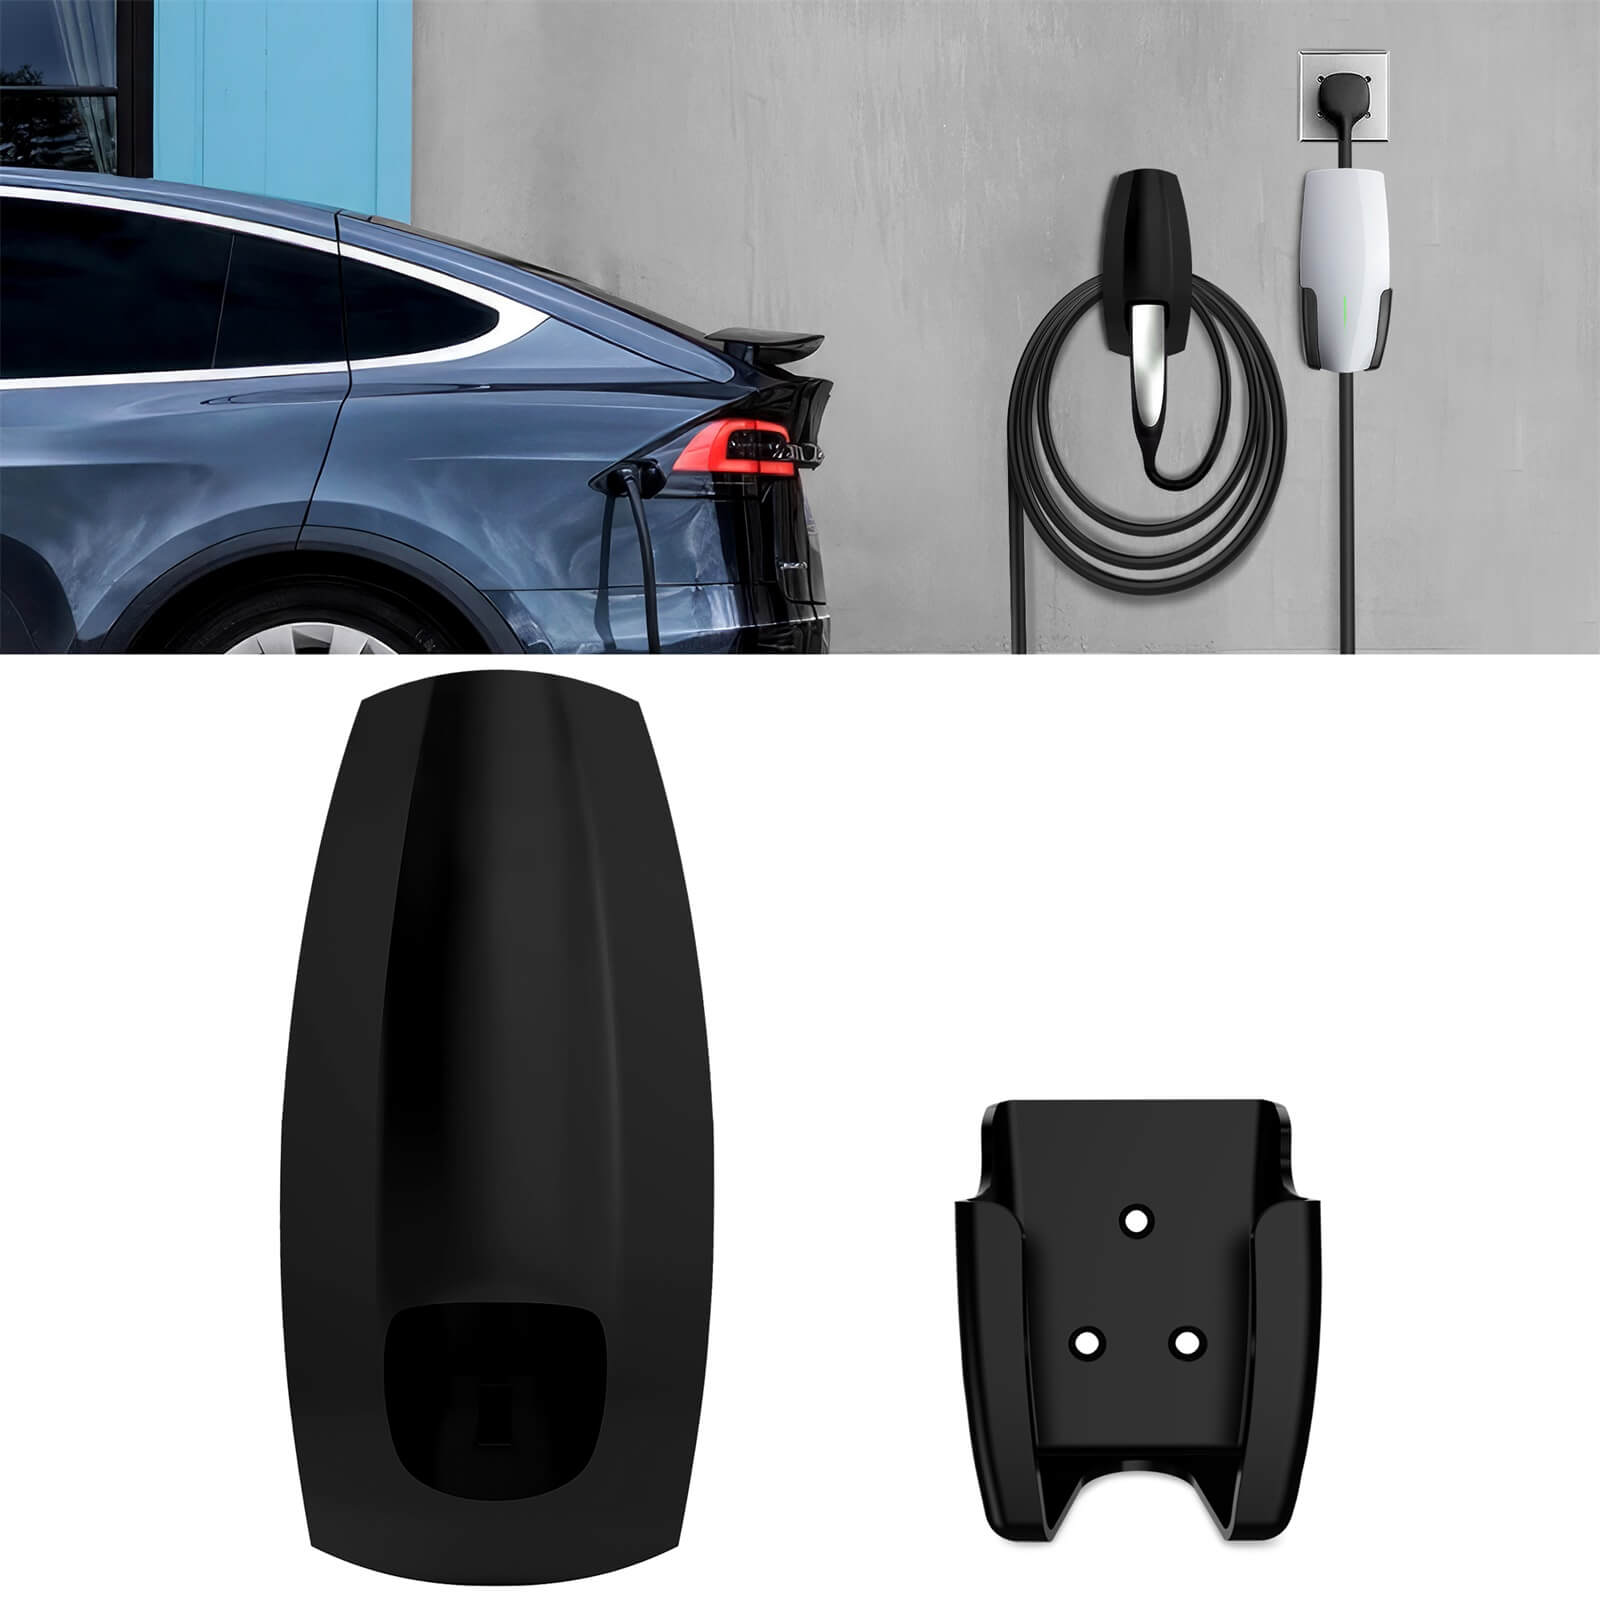 MICTUNING Charging Cable Holder for Tesla, Wall Mount UMC Connector Adapter  Organizer Bracket, Compatible with Model 3 Model Y Model X Model S